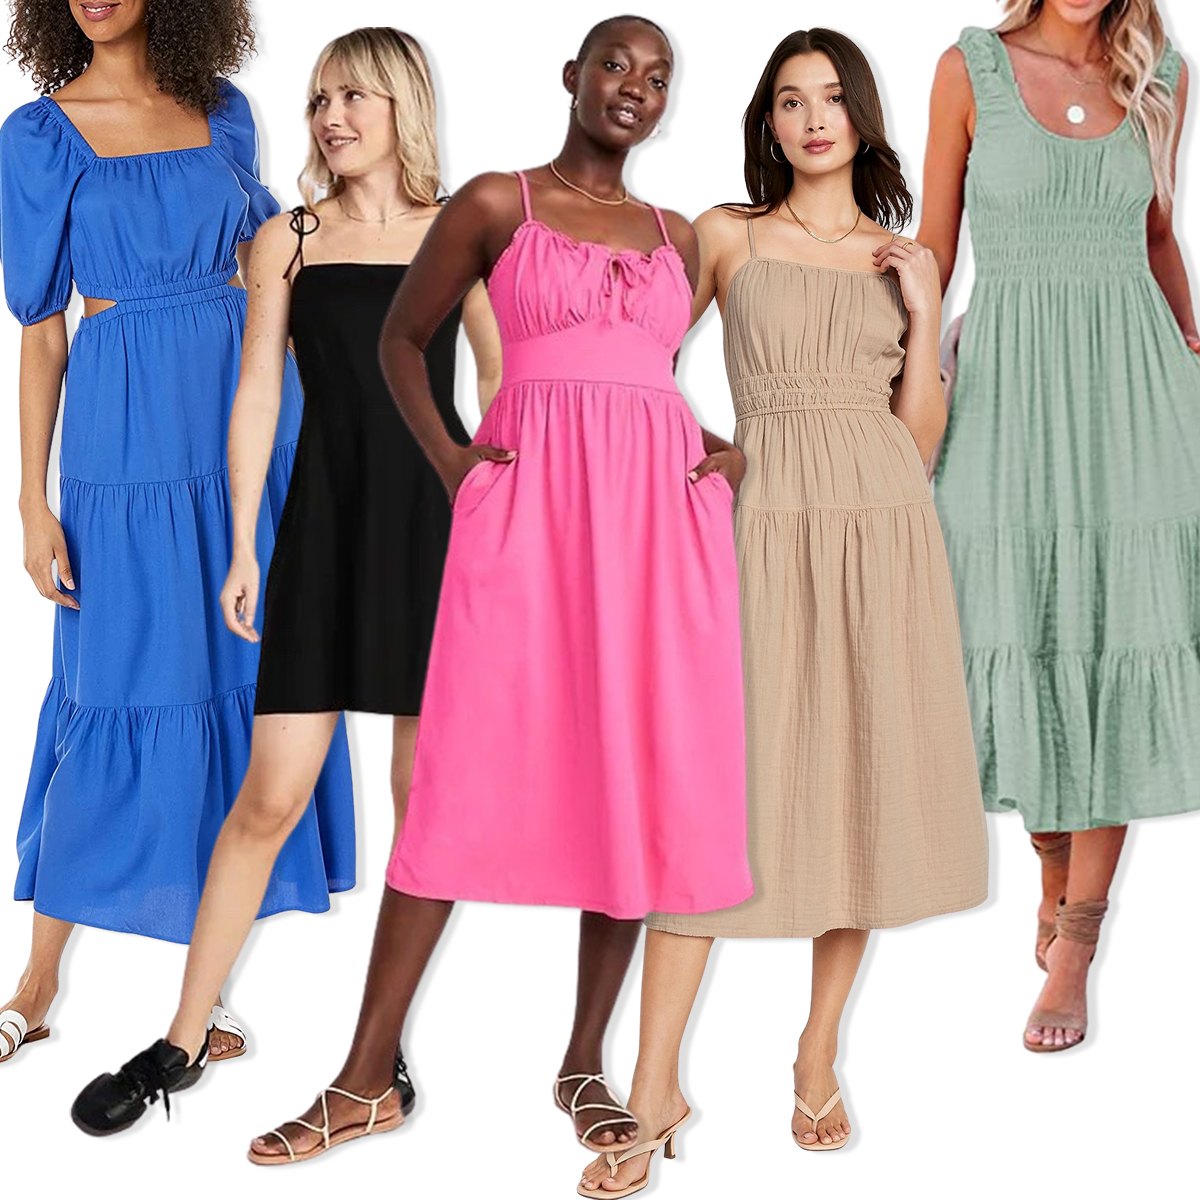 7 Dresses With Pockets (That Are Real & Functioning)